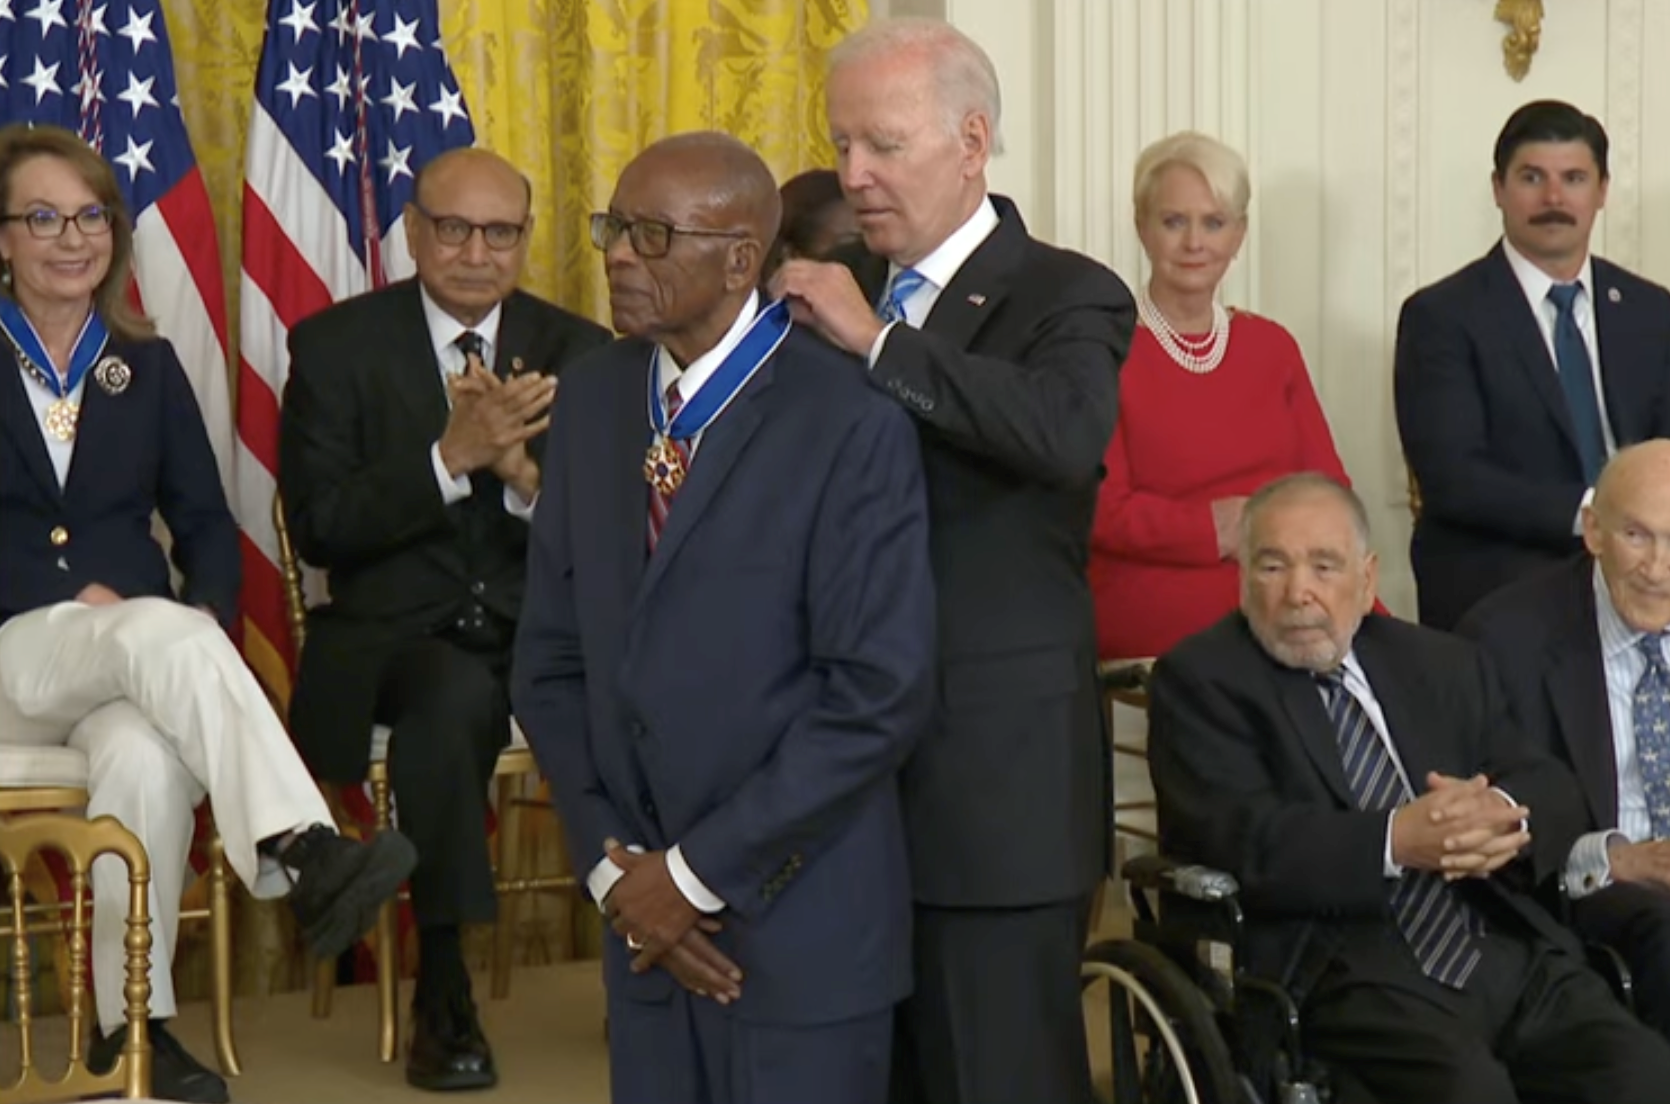 Mr. Fred Gray receives the Presidential Medal of Freedom